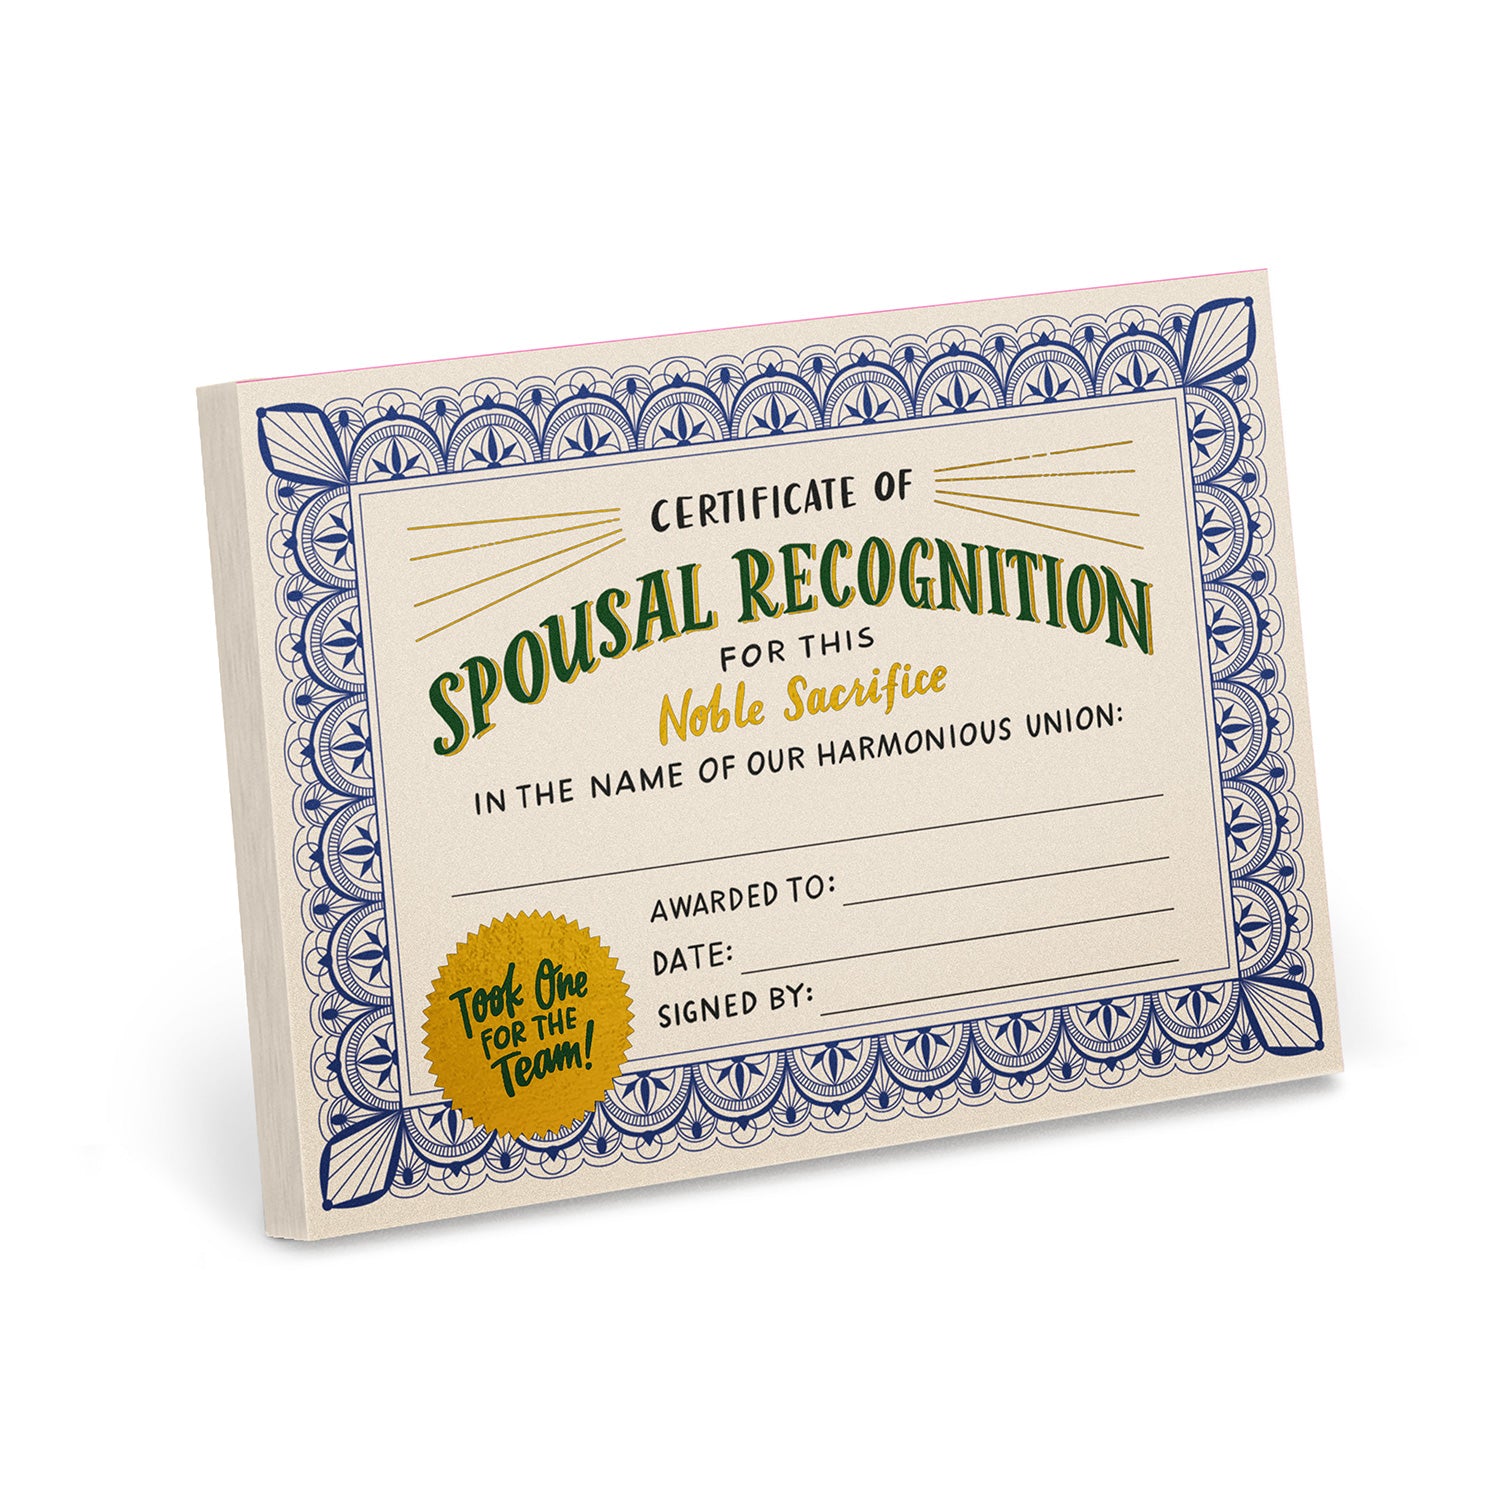 Spousal Recognition Certificate Pad (Refresh)